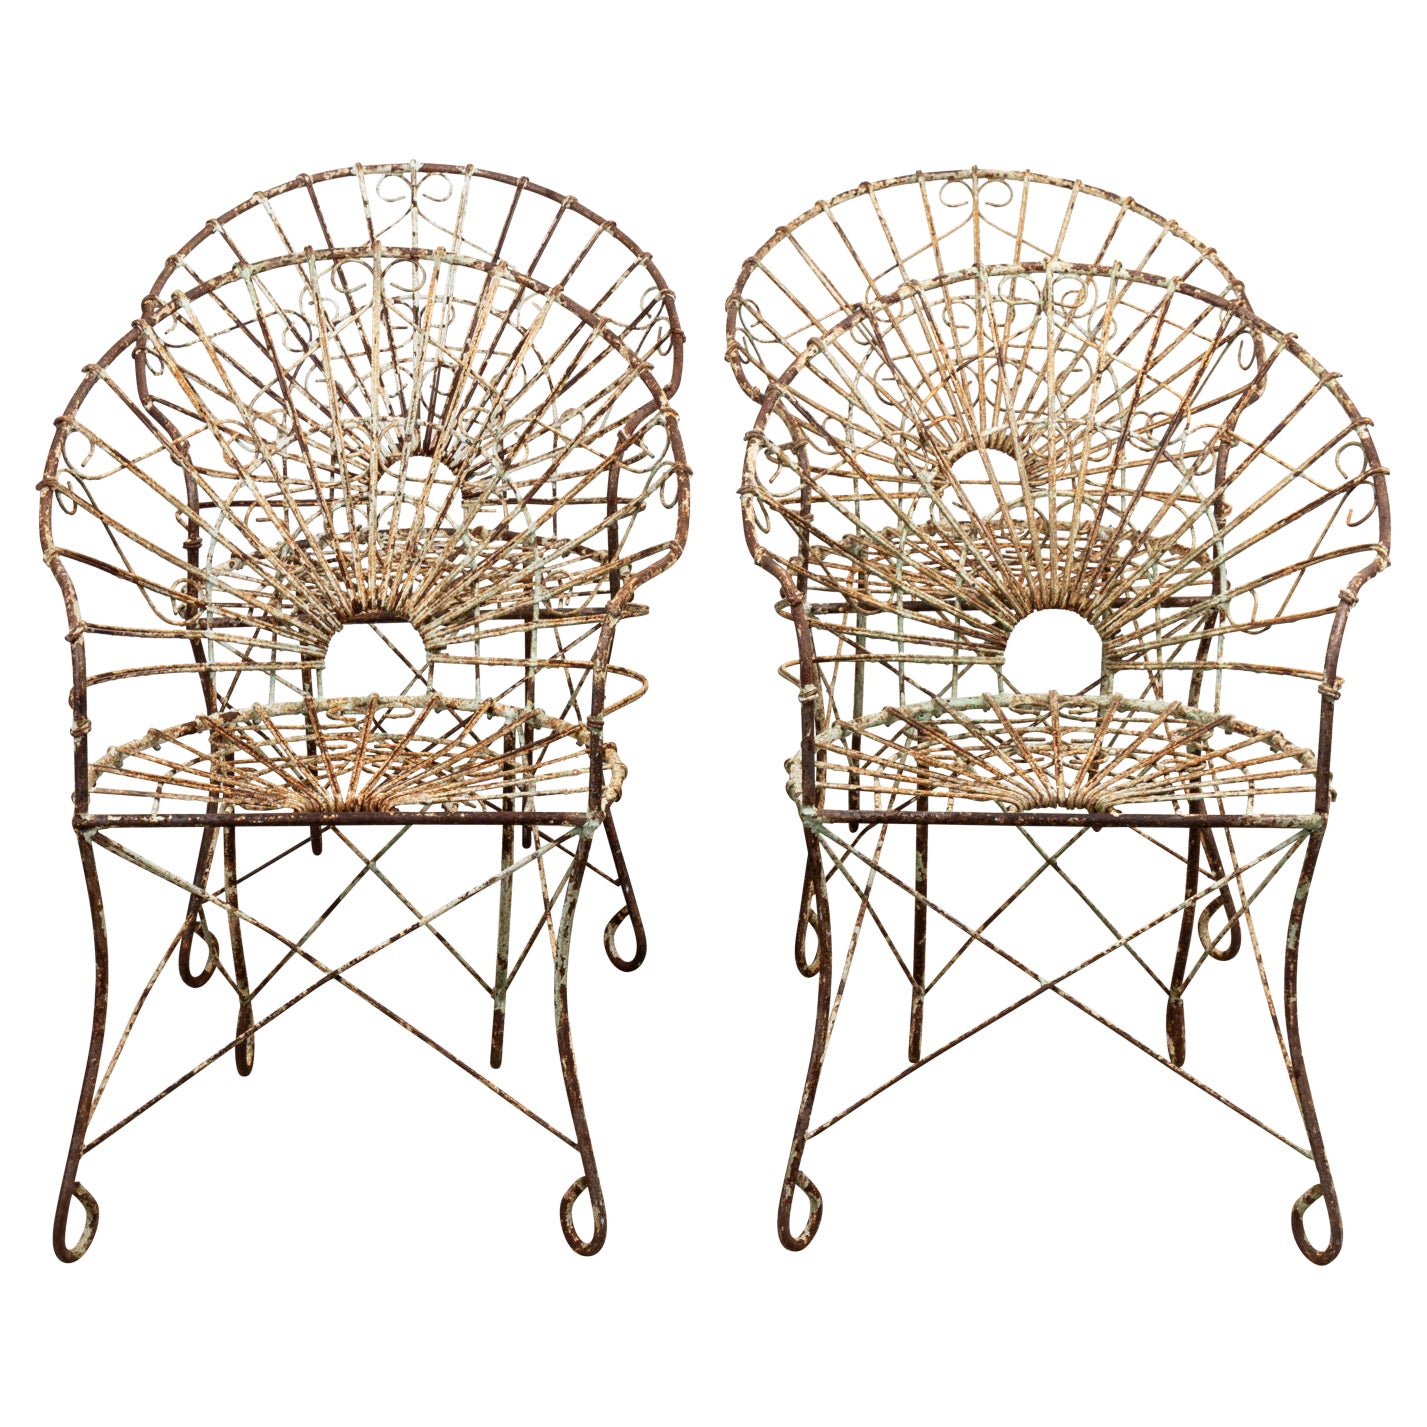 Set of Four French Wire Chairs